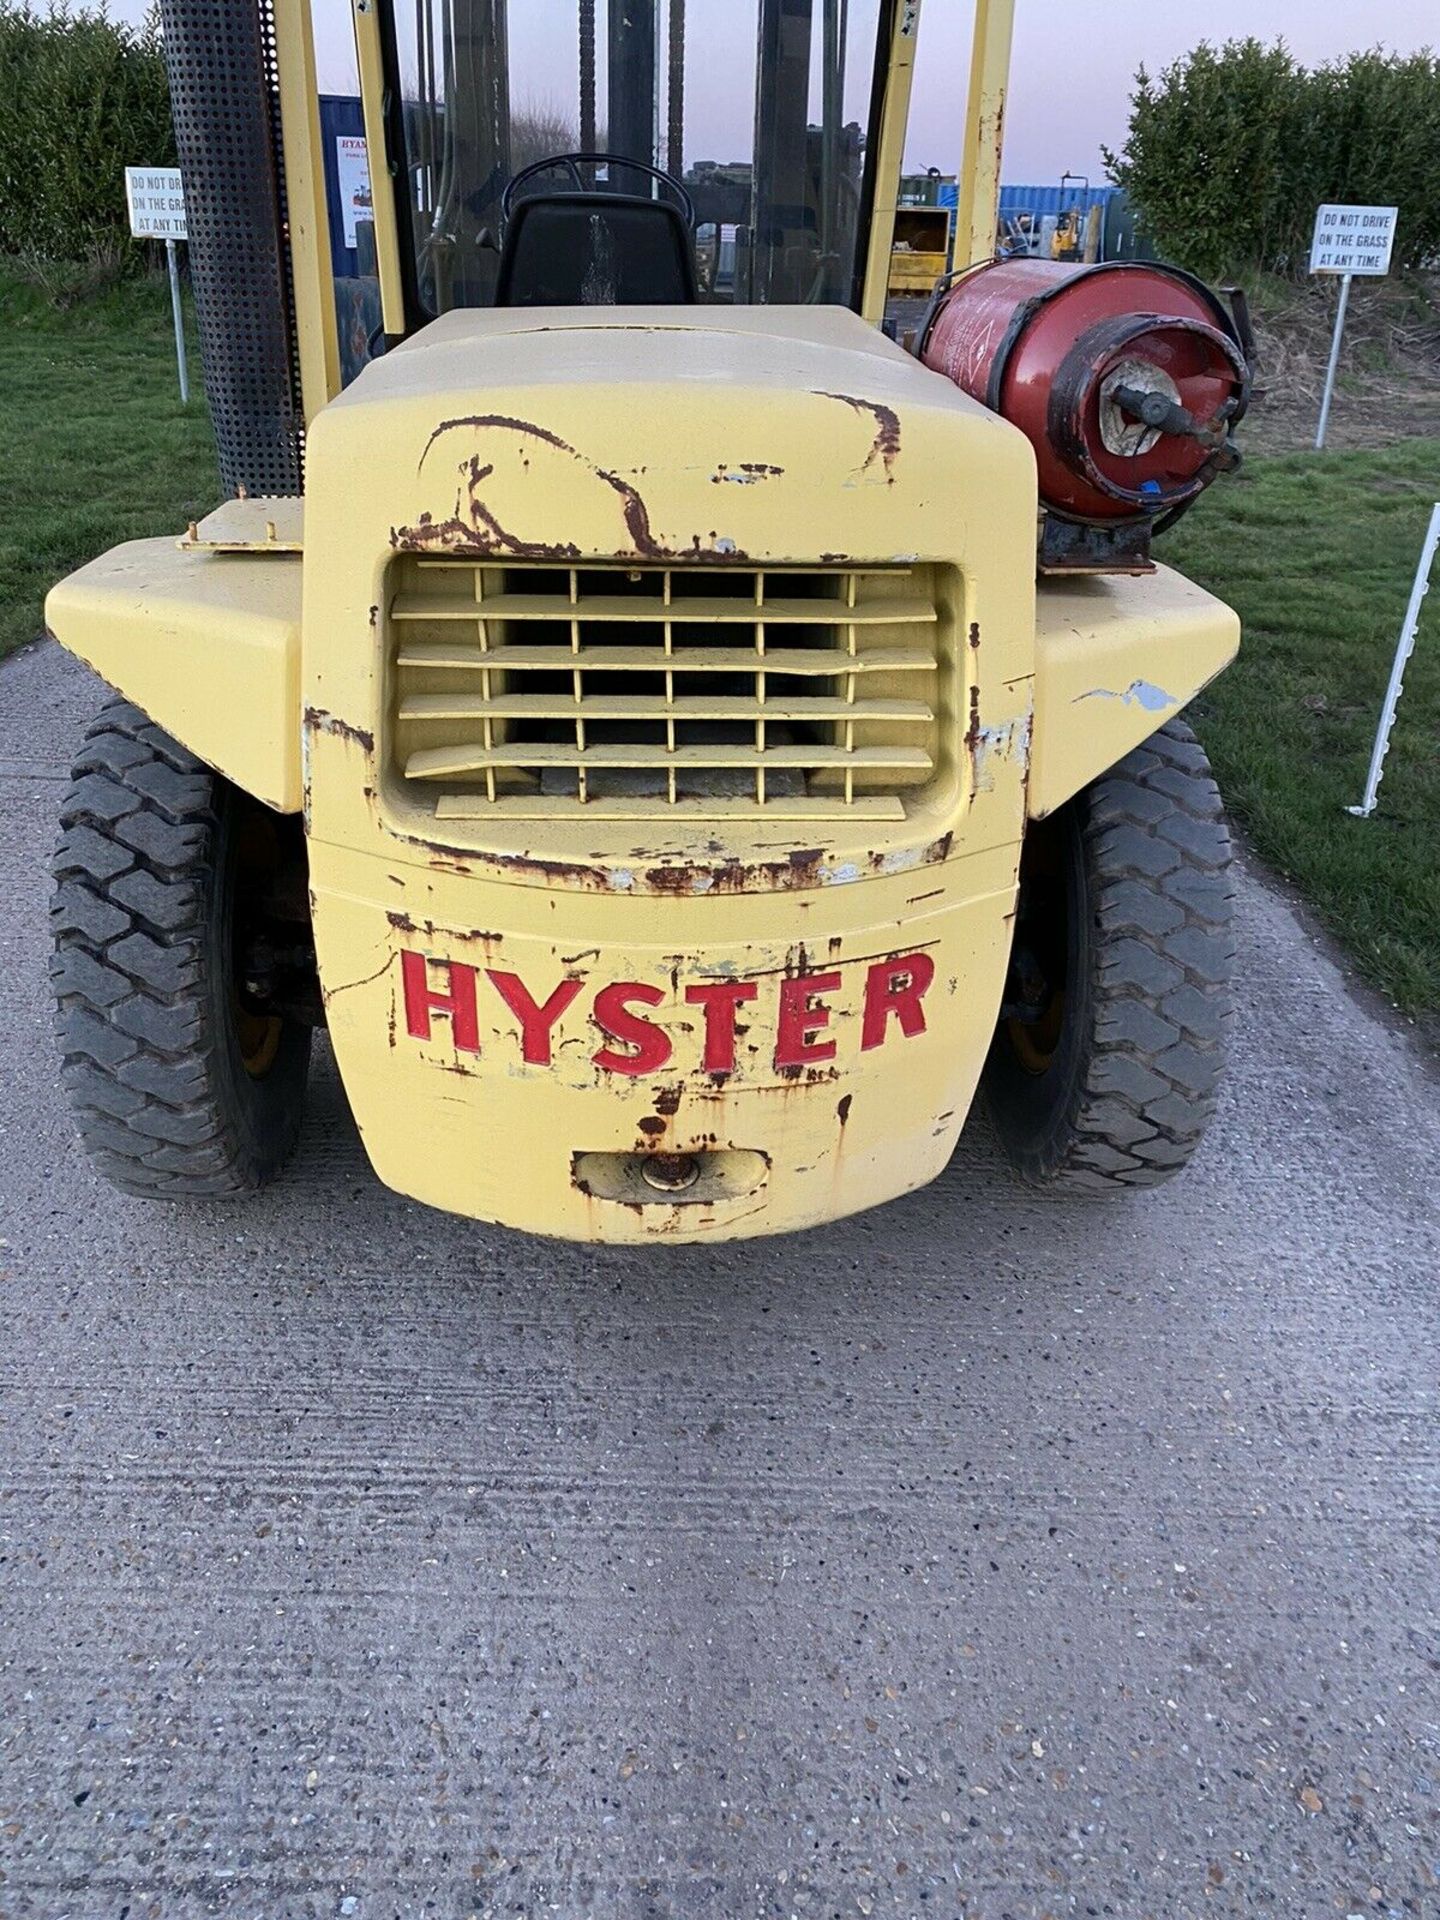 Hyster gas forklift truck - Image 5 of 7